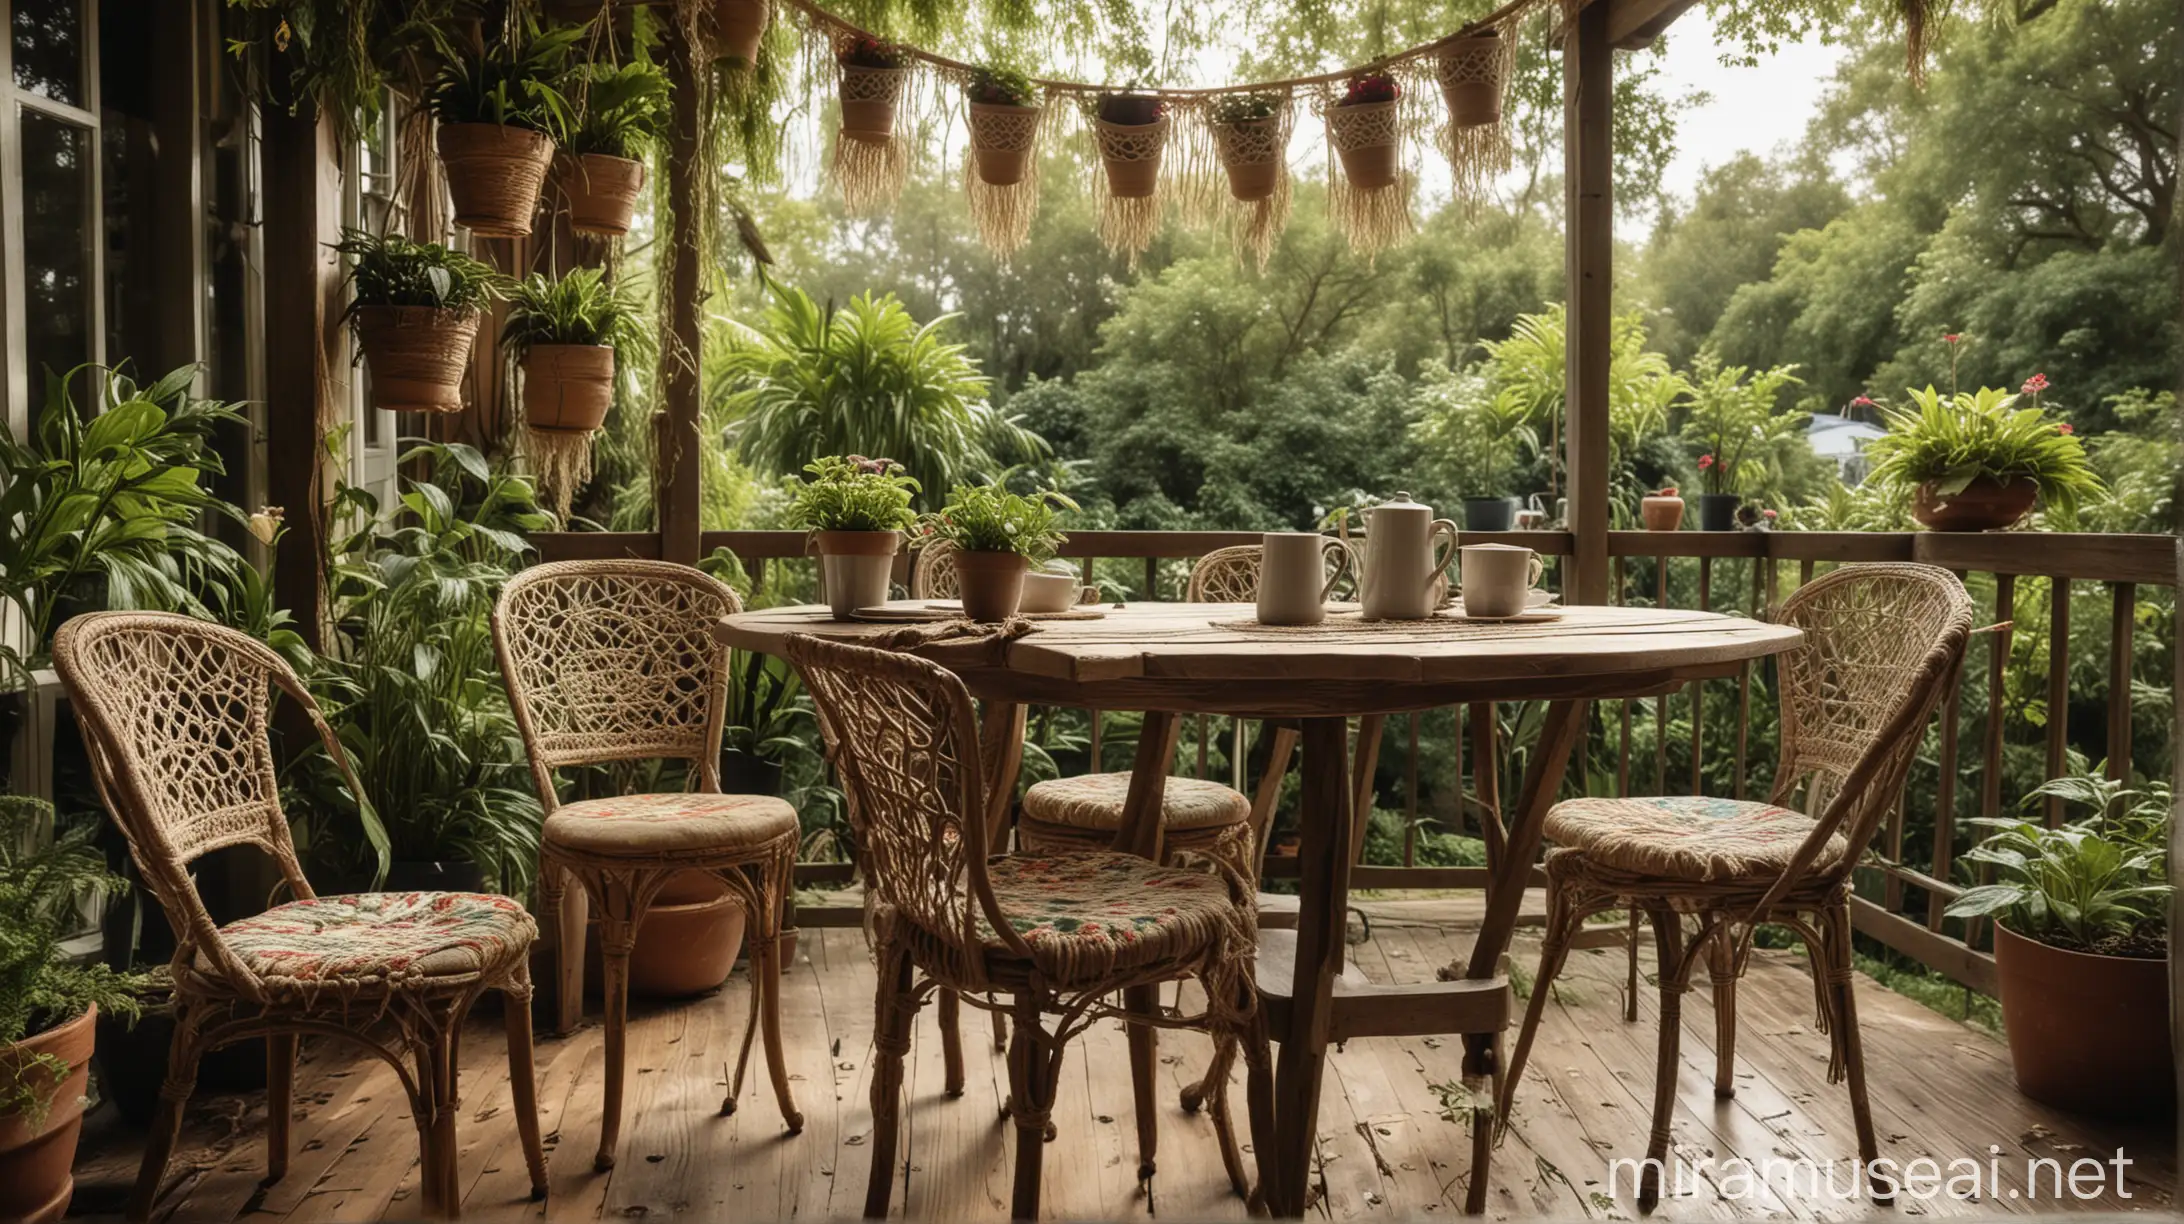 A vintage-style, wide-angle shot (24mm) taken from a low angle, capturing a cozy outdoor coffee nook with a worn wooden table and mismatched chairs. The space is adorned with macrame hangings, vibrant patterned cushions, and an abundance of lush green plants. A steaming cup of coffee sits on the table, sunlight dappling through the leaves creating warm, golden tones.